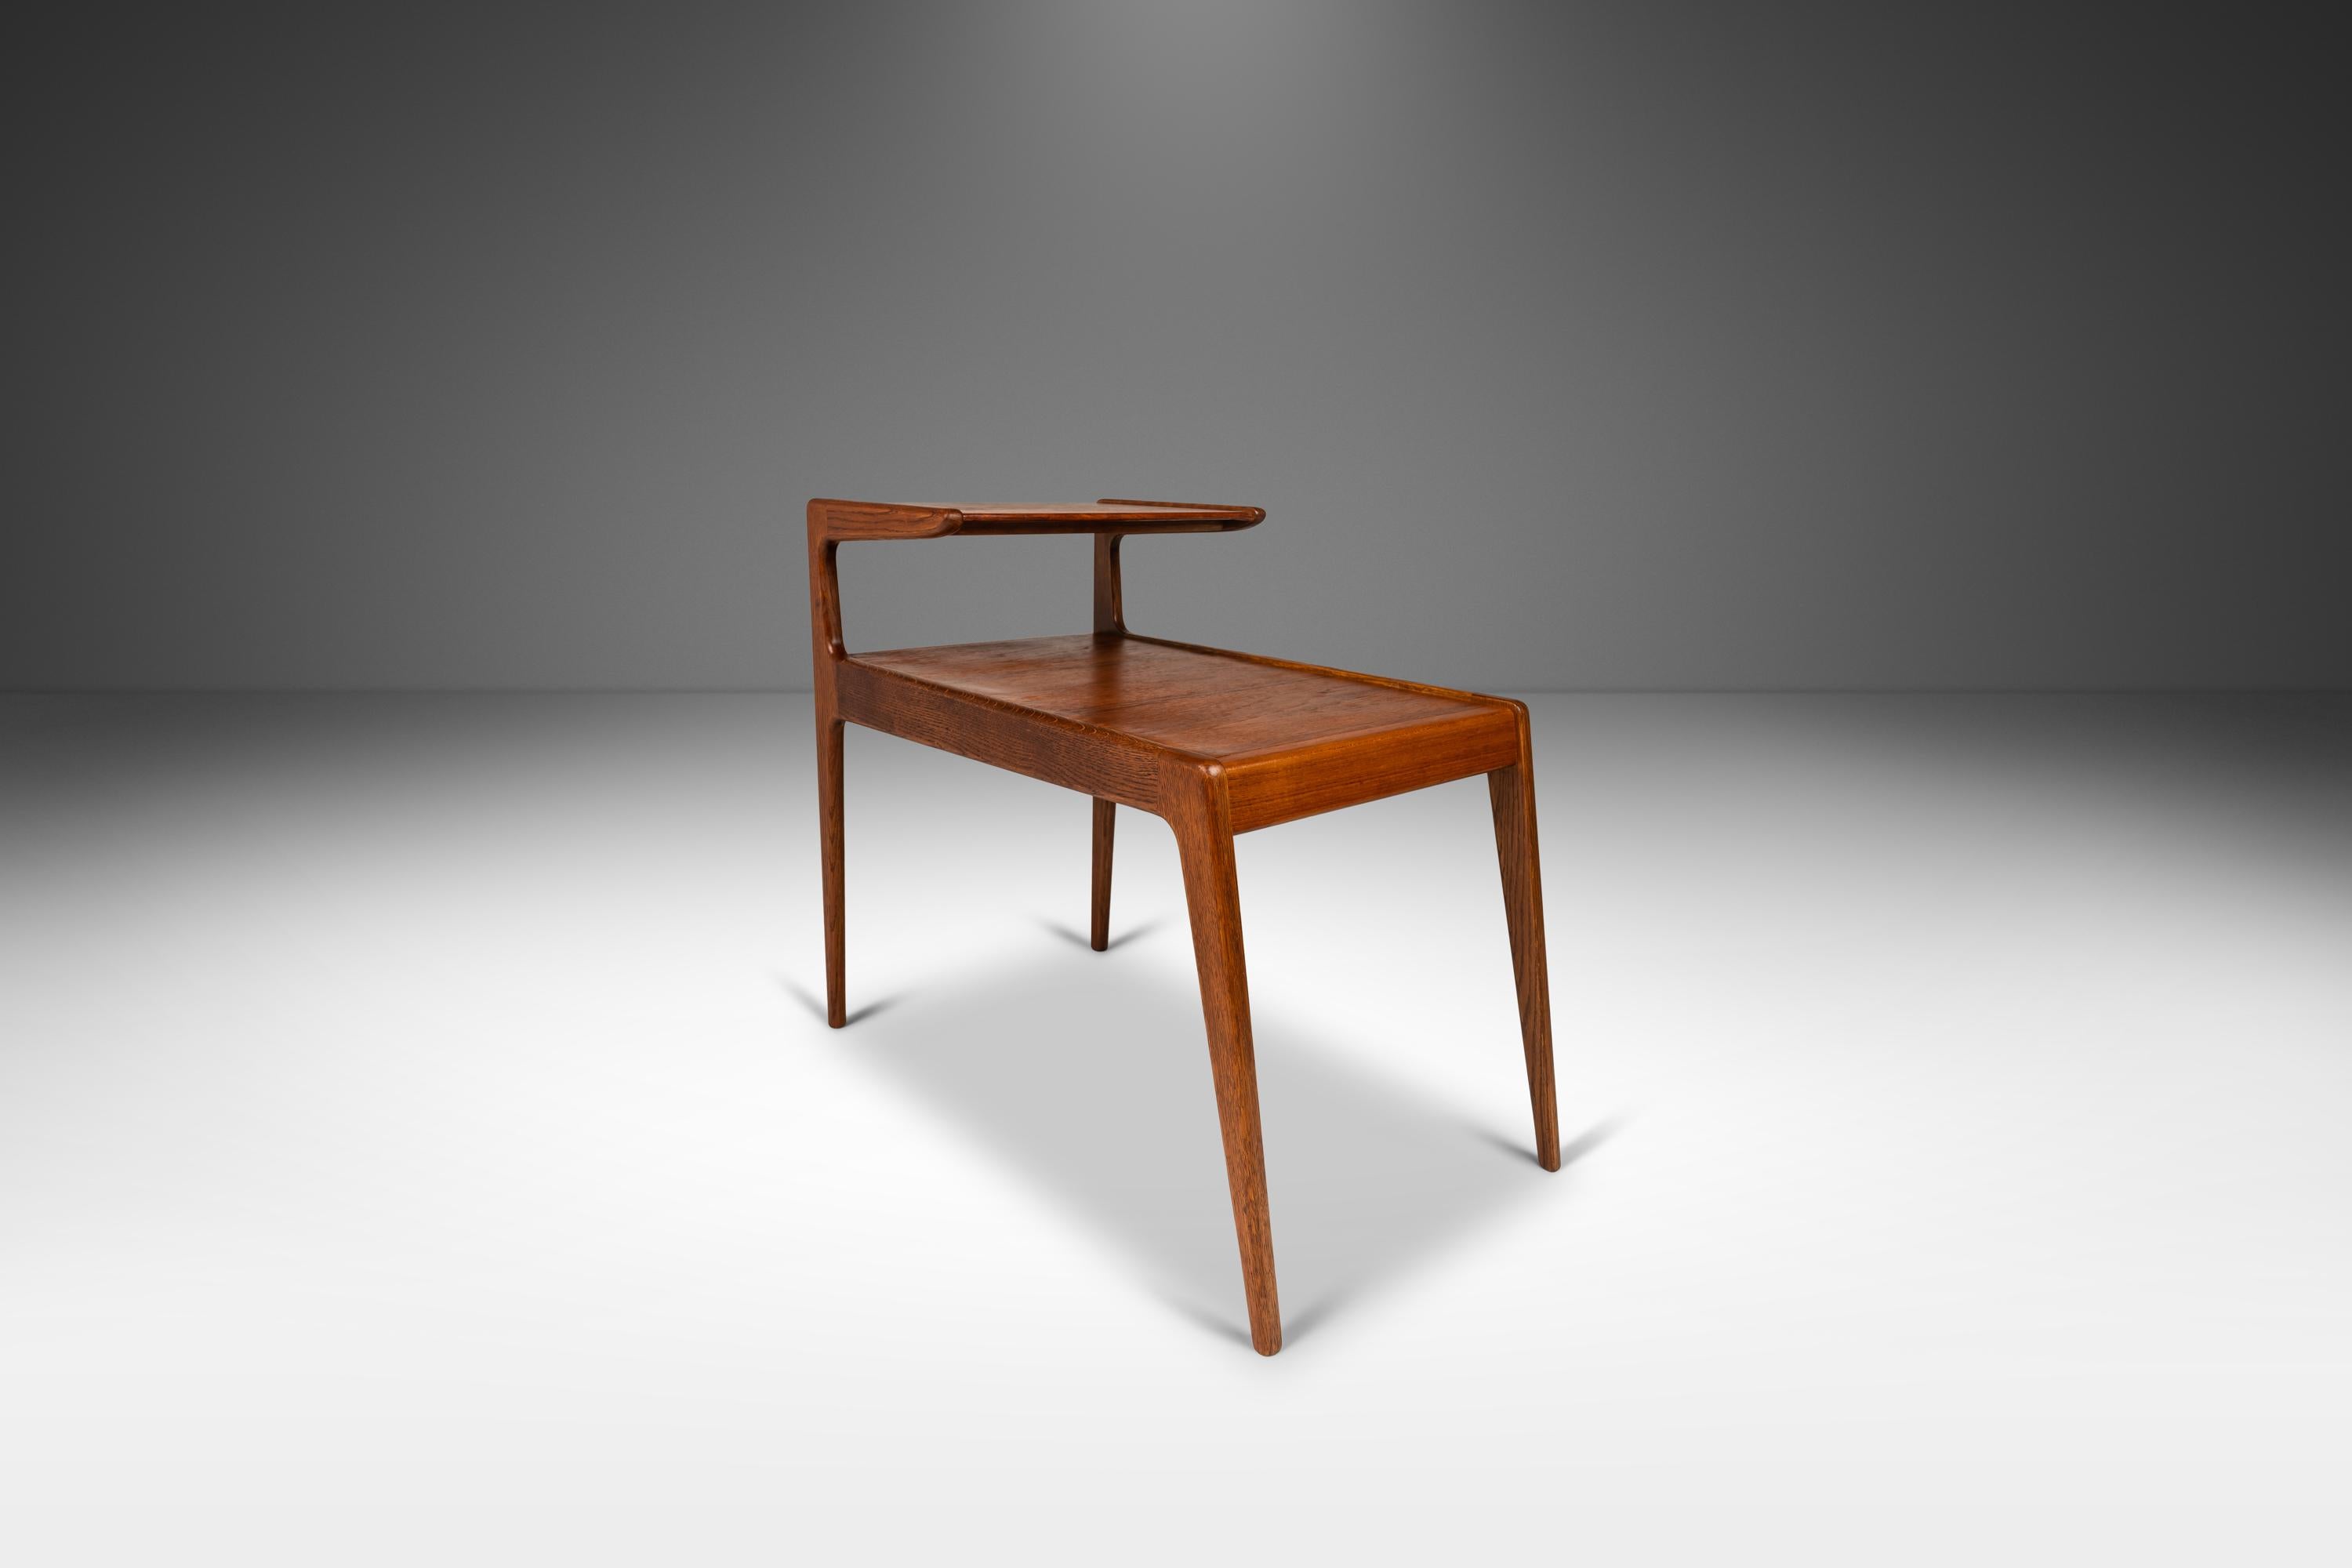 Introducing a rare and limited two-tier side table in teak by Kurt Østervig for Jason Møbler, crafted in the 1960's in Denmark. This now iconic table is constructed from a mix of solid and veneered Burmese teak, showcasing the natural beauty of the